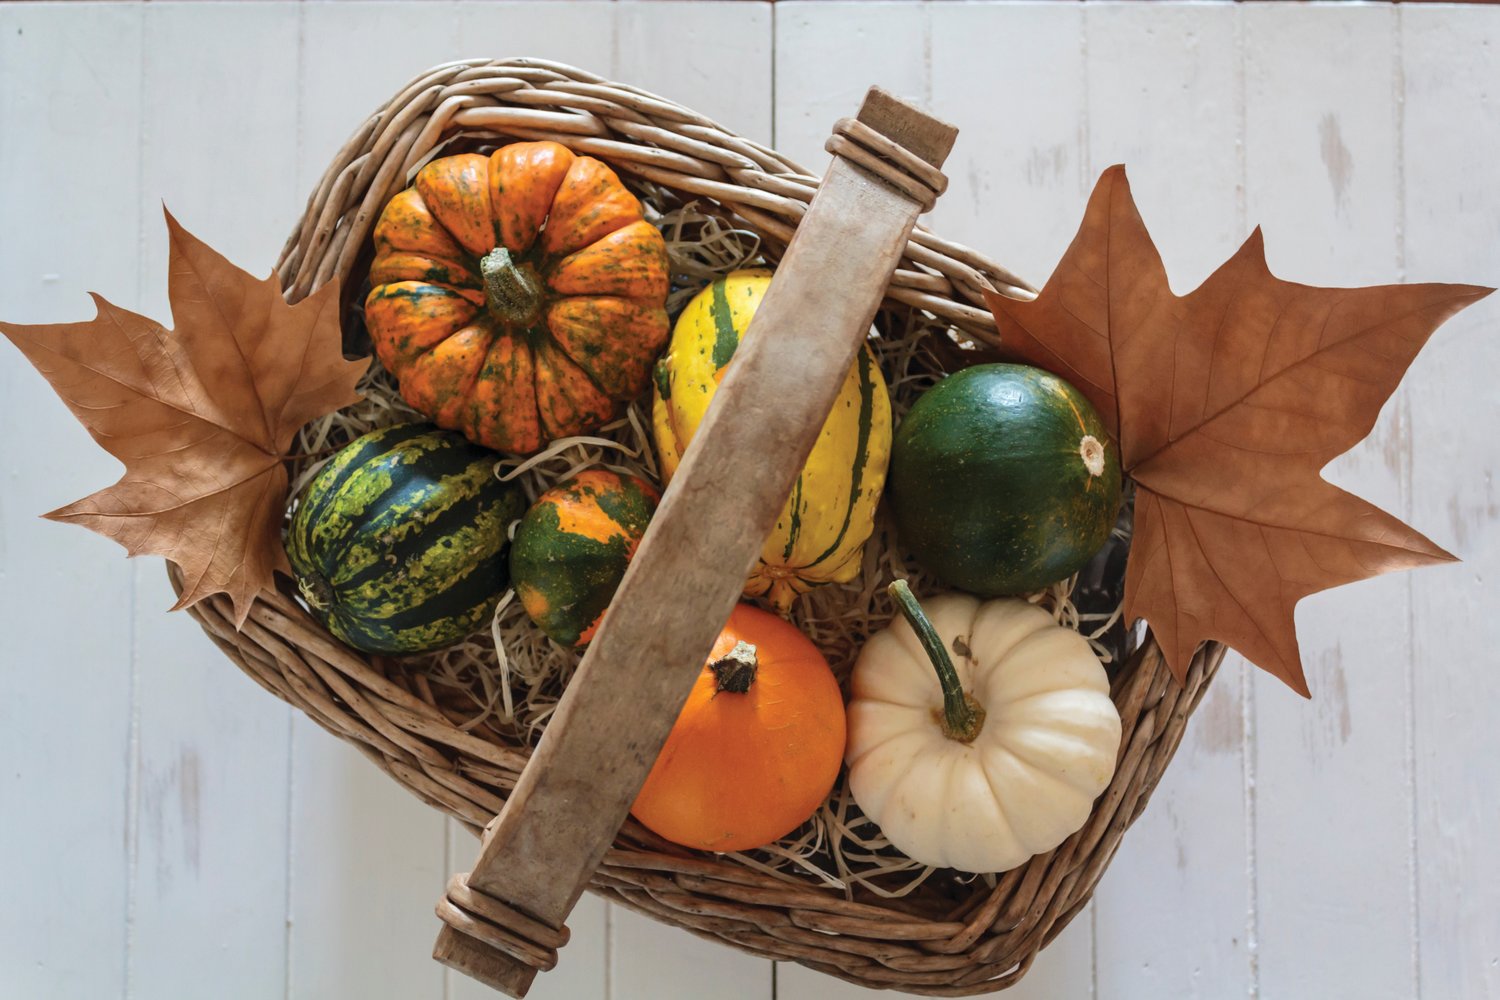 The fall harvest provides a dazzling display of winter squashes.